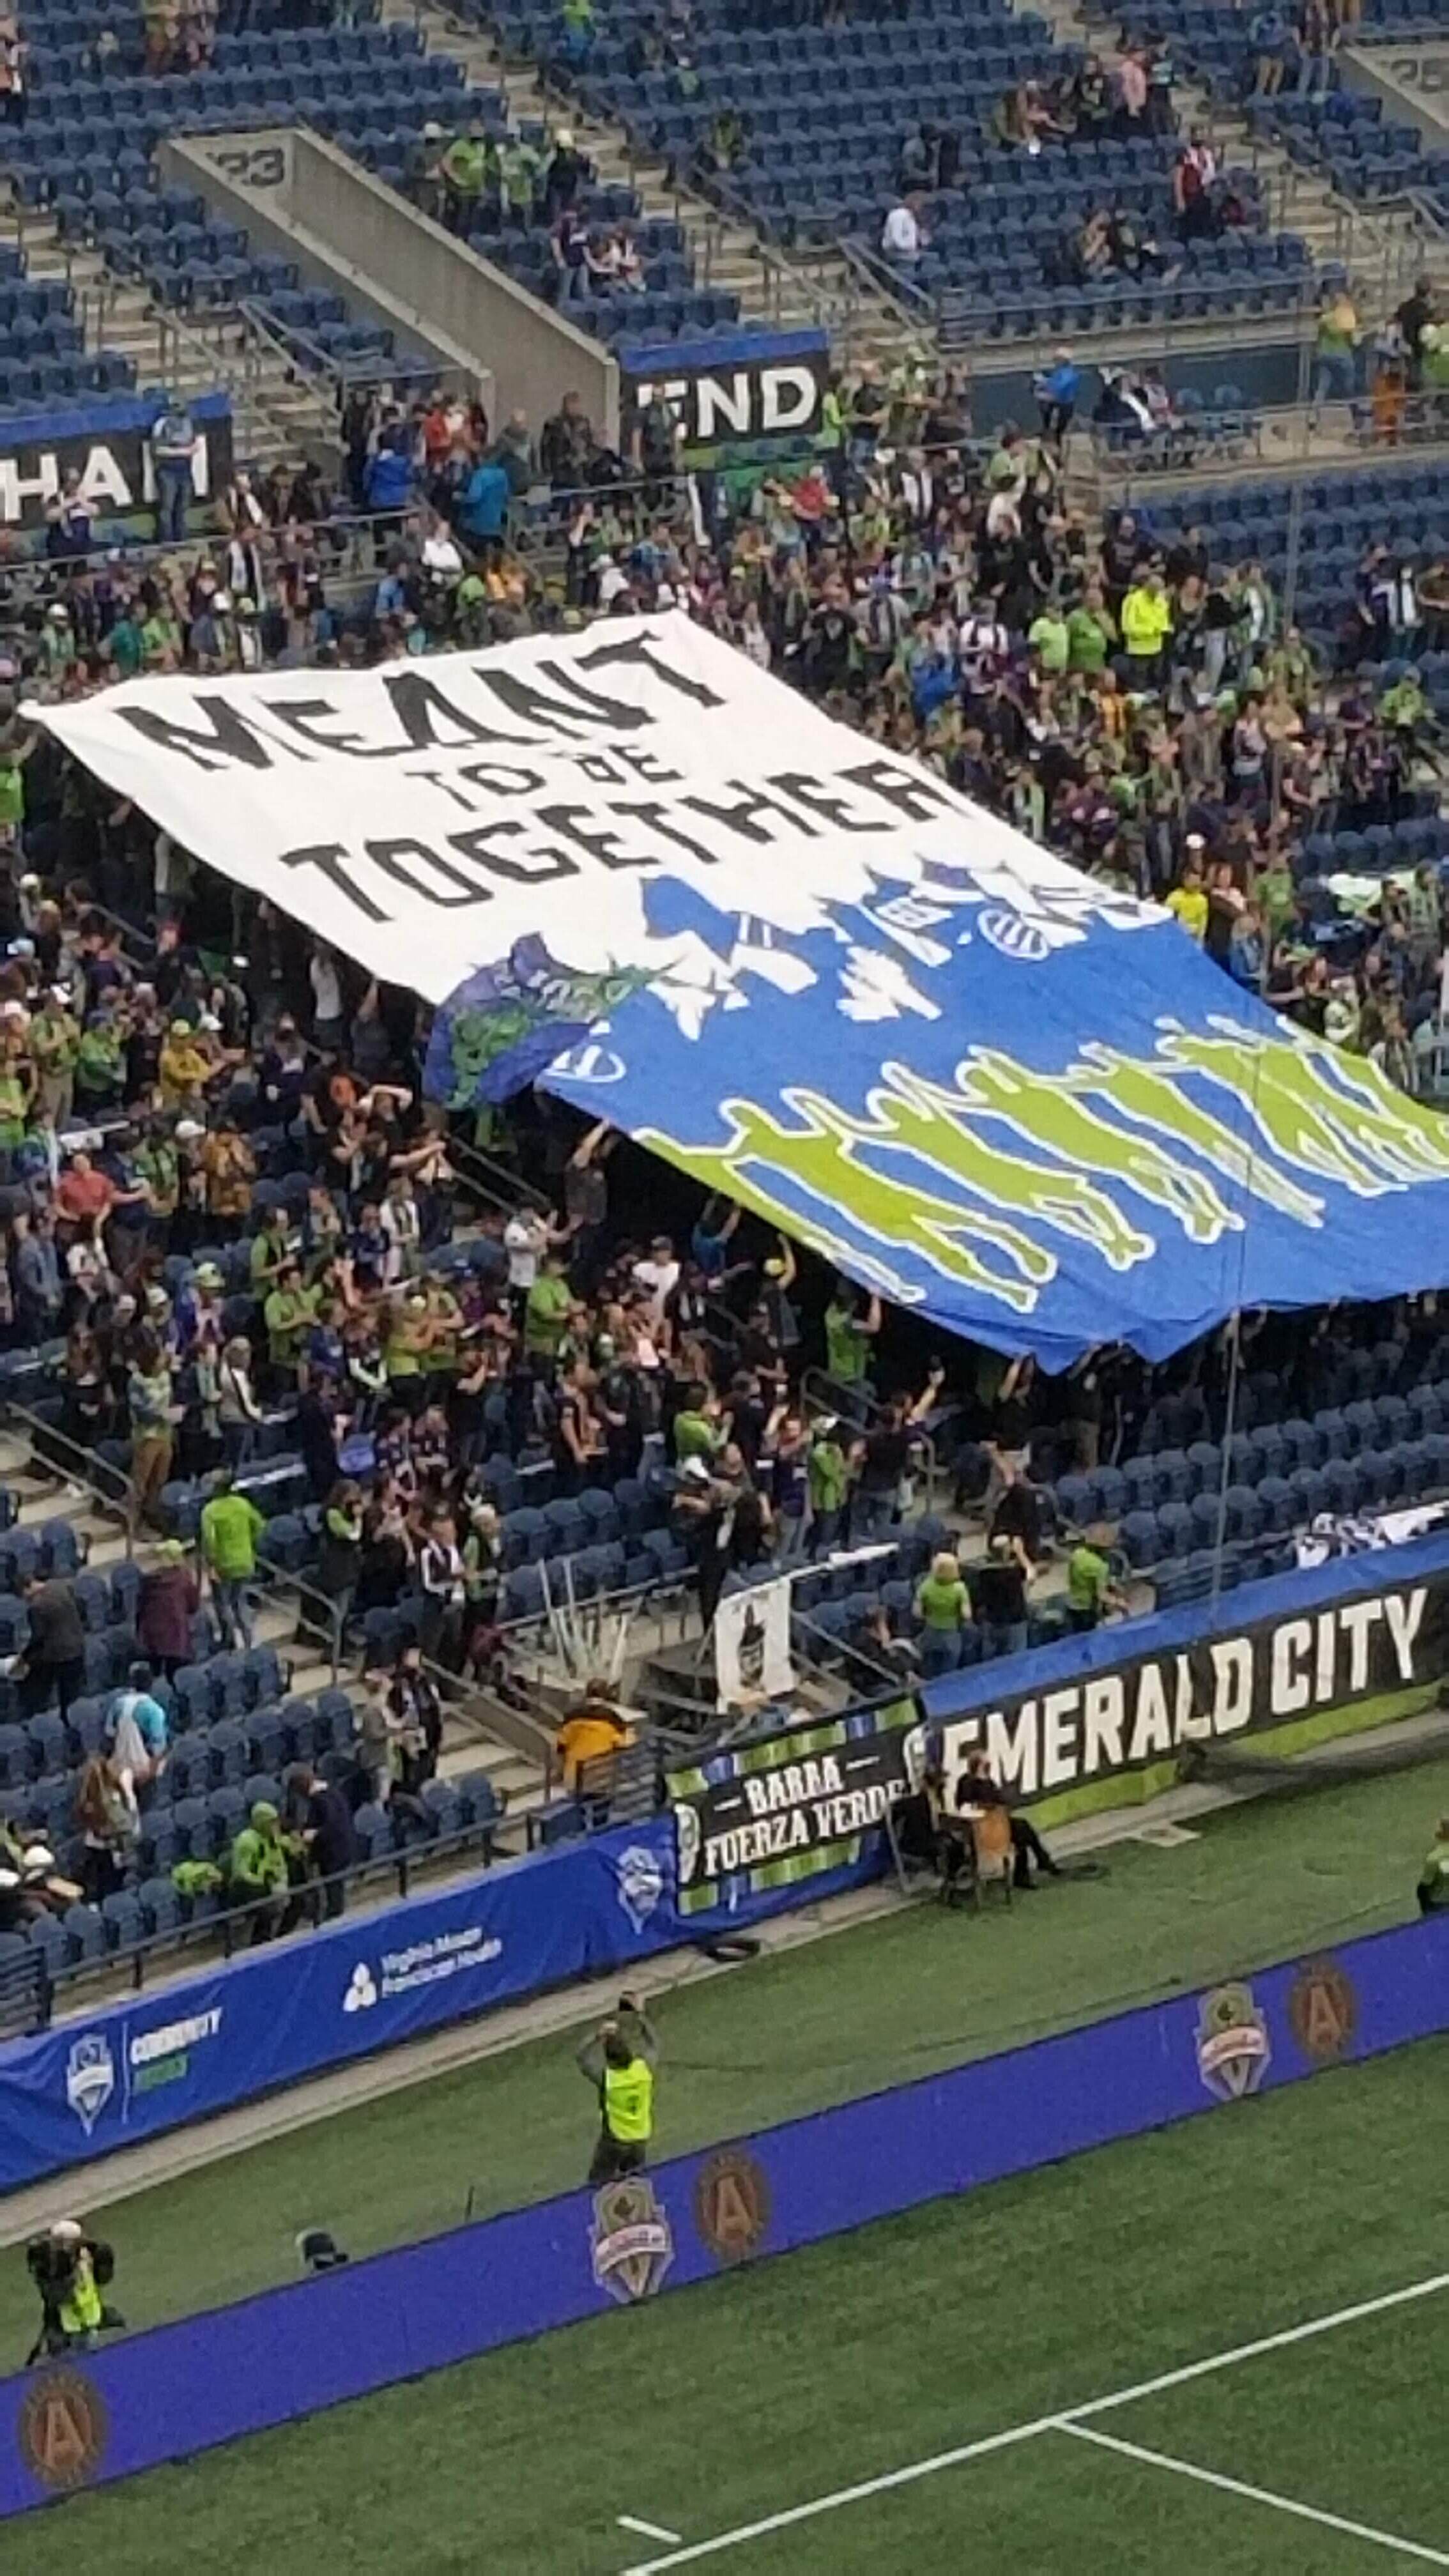 Return to in-person Sounders.jpg